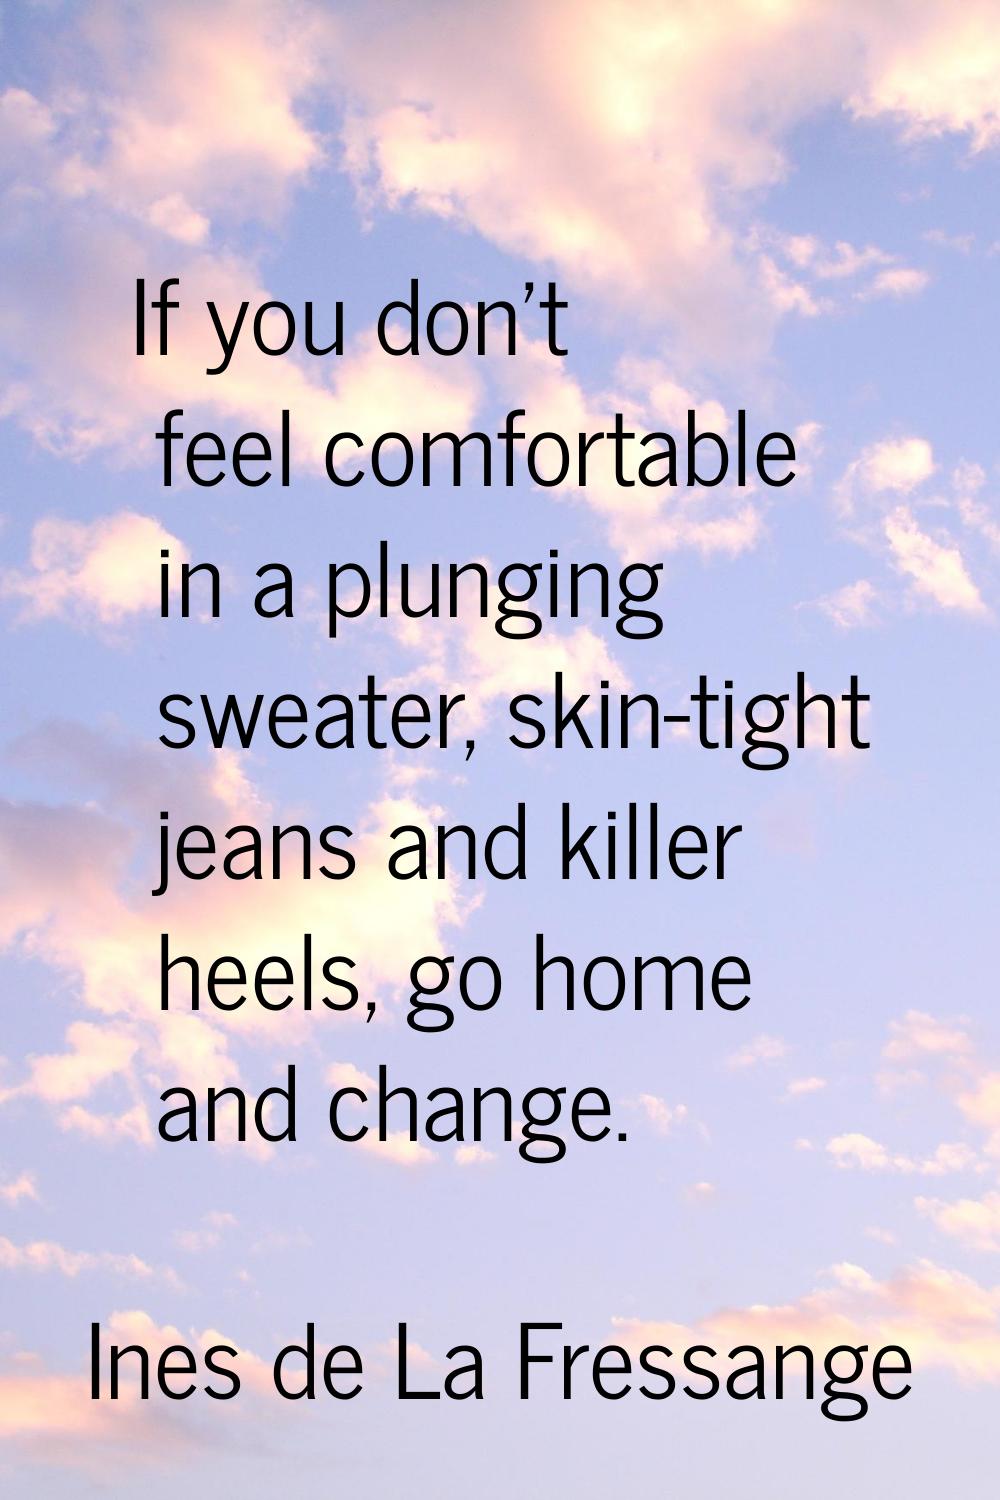 If you don't feel comfortable in a plunging sweater, skin-tight jeans and killer heels, go home and